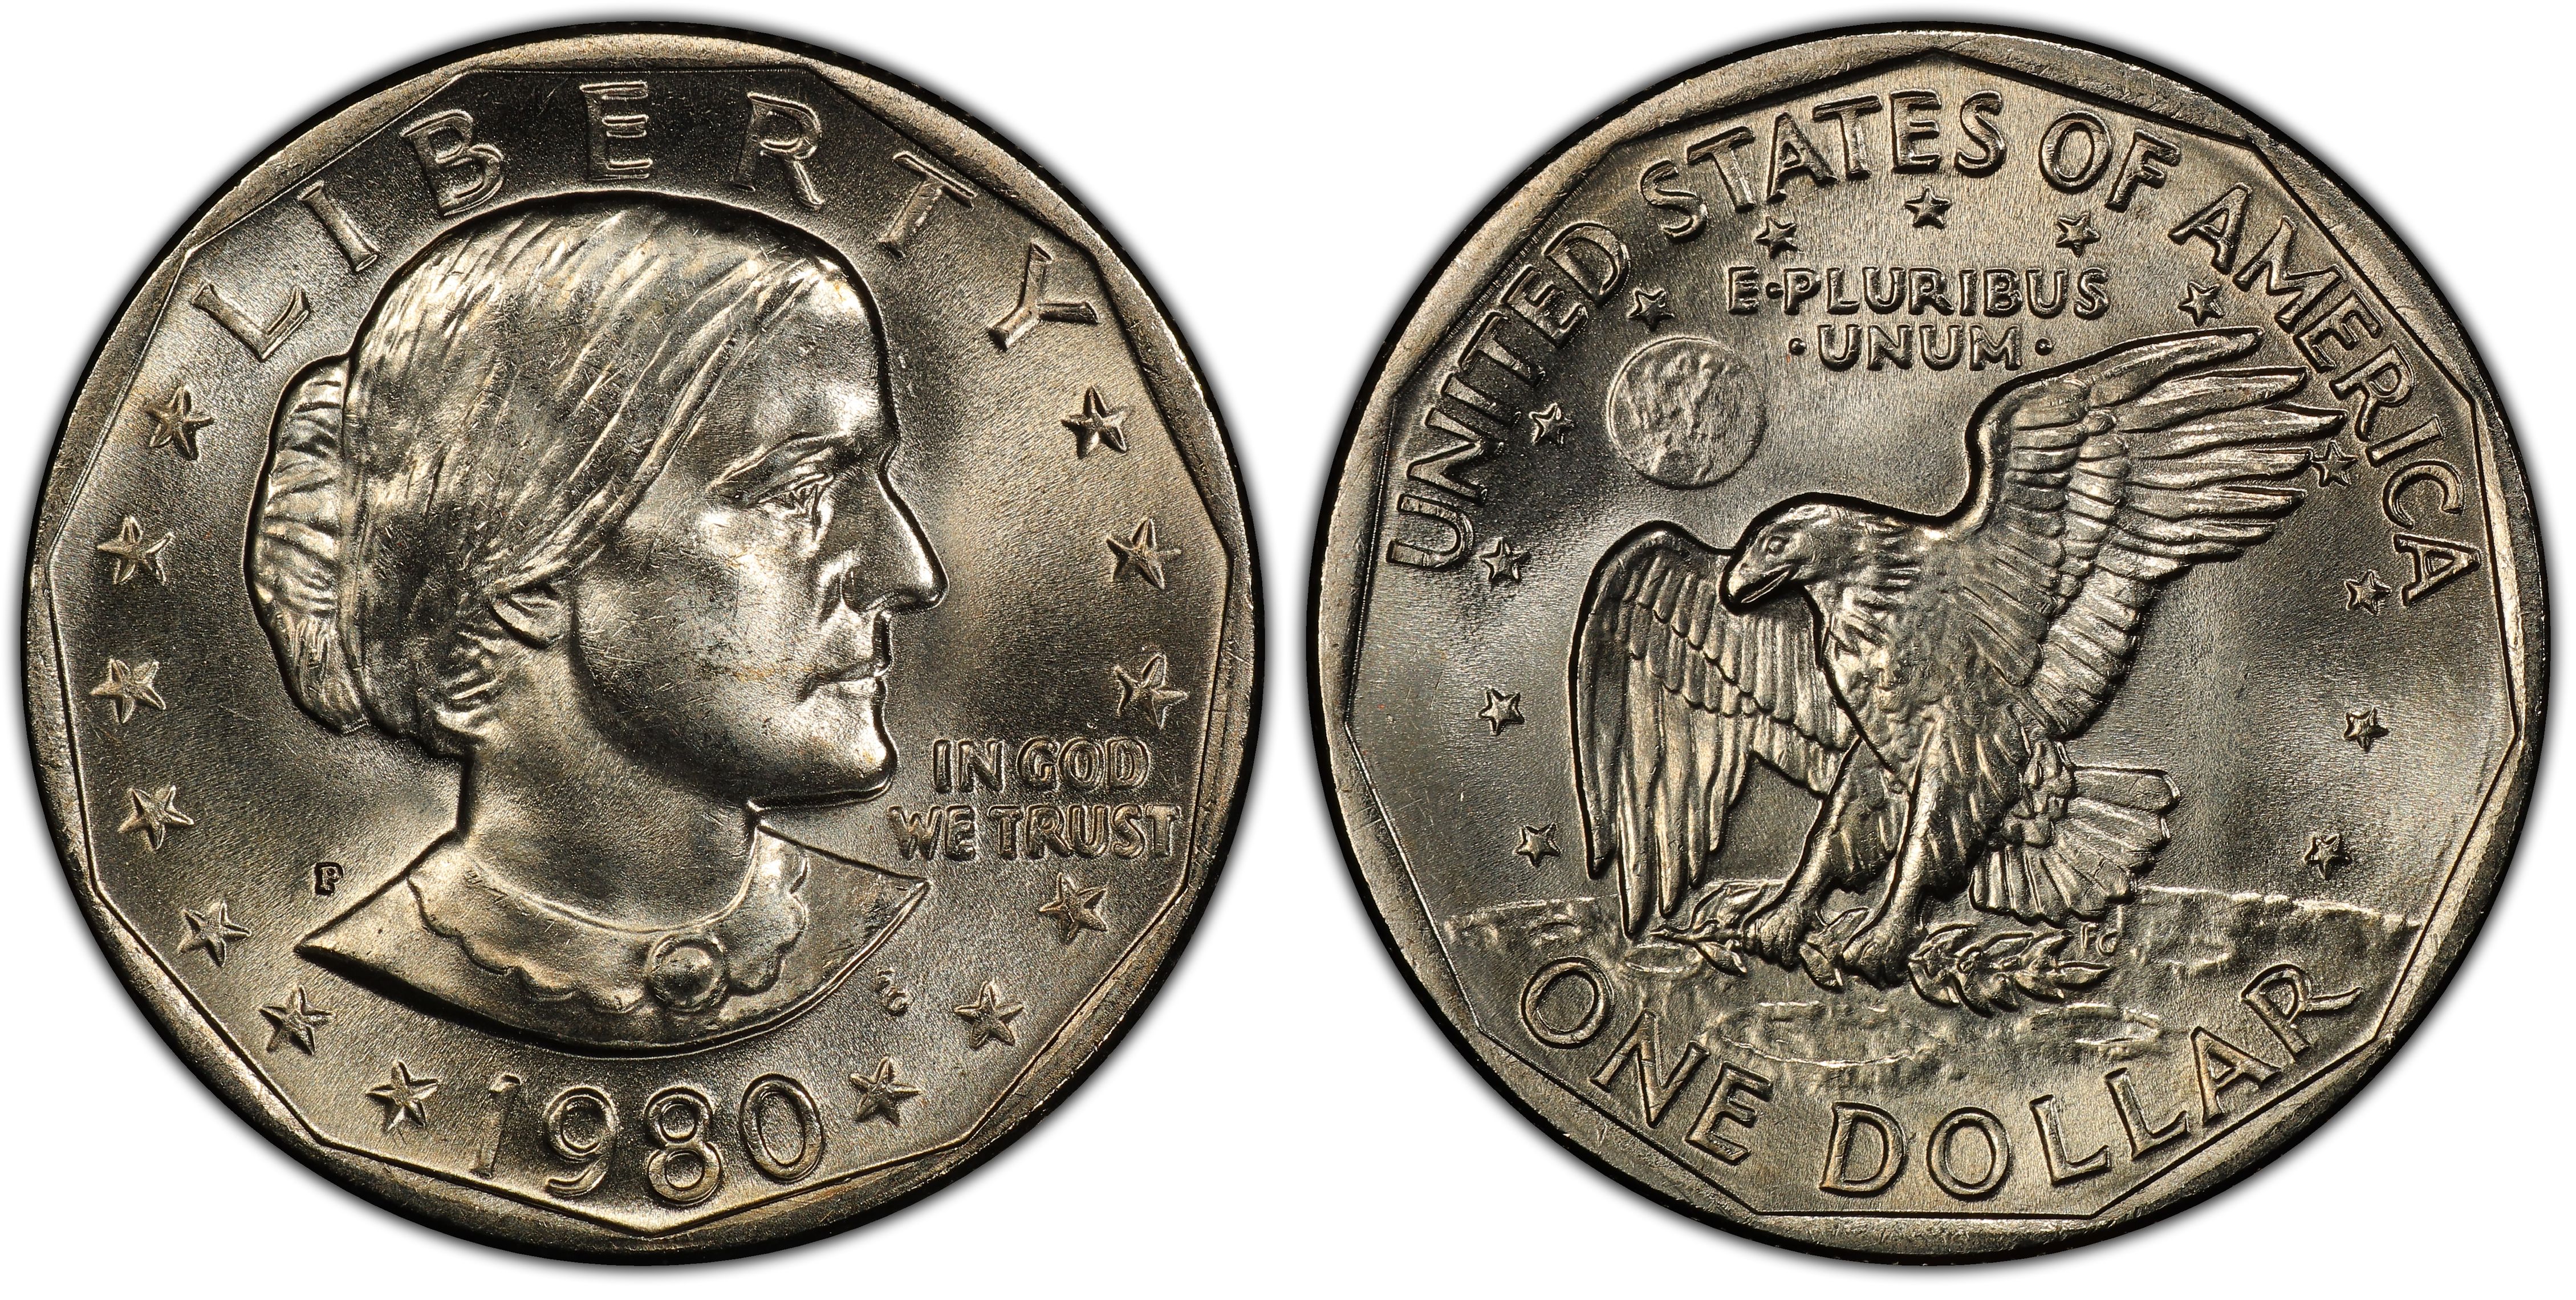 Images of Susan B. Anthony Dollar 1980-P SBA$1 - PCGS CoinFacts